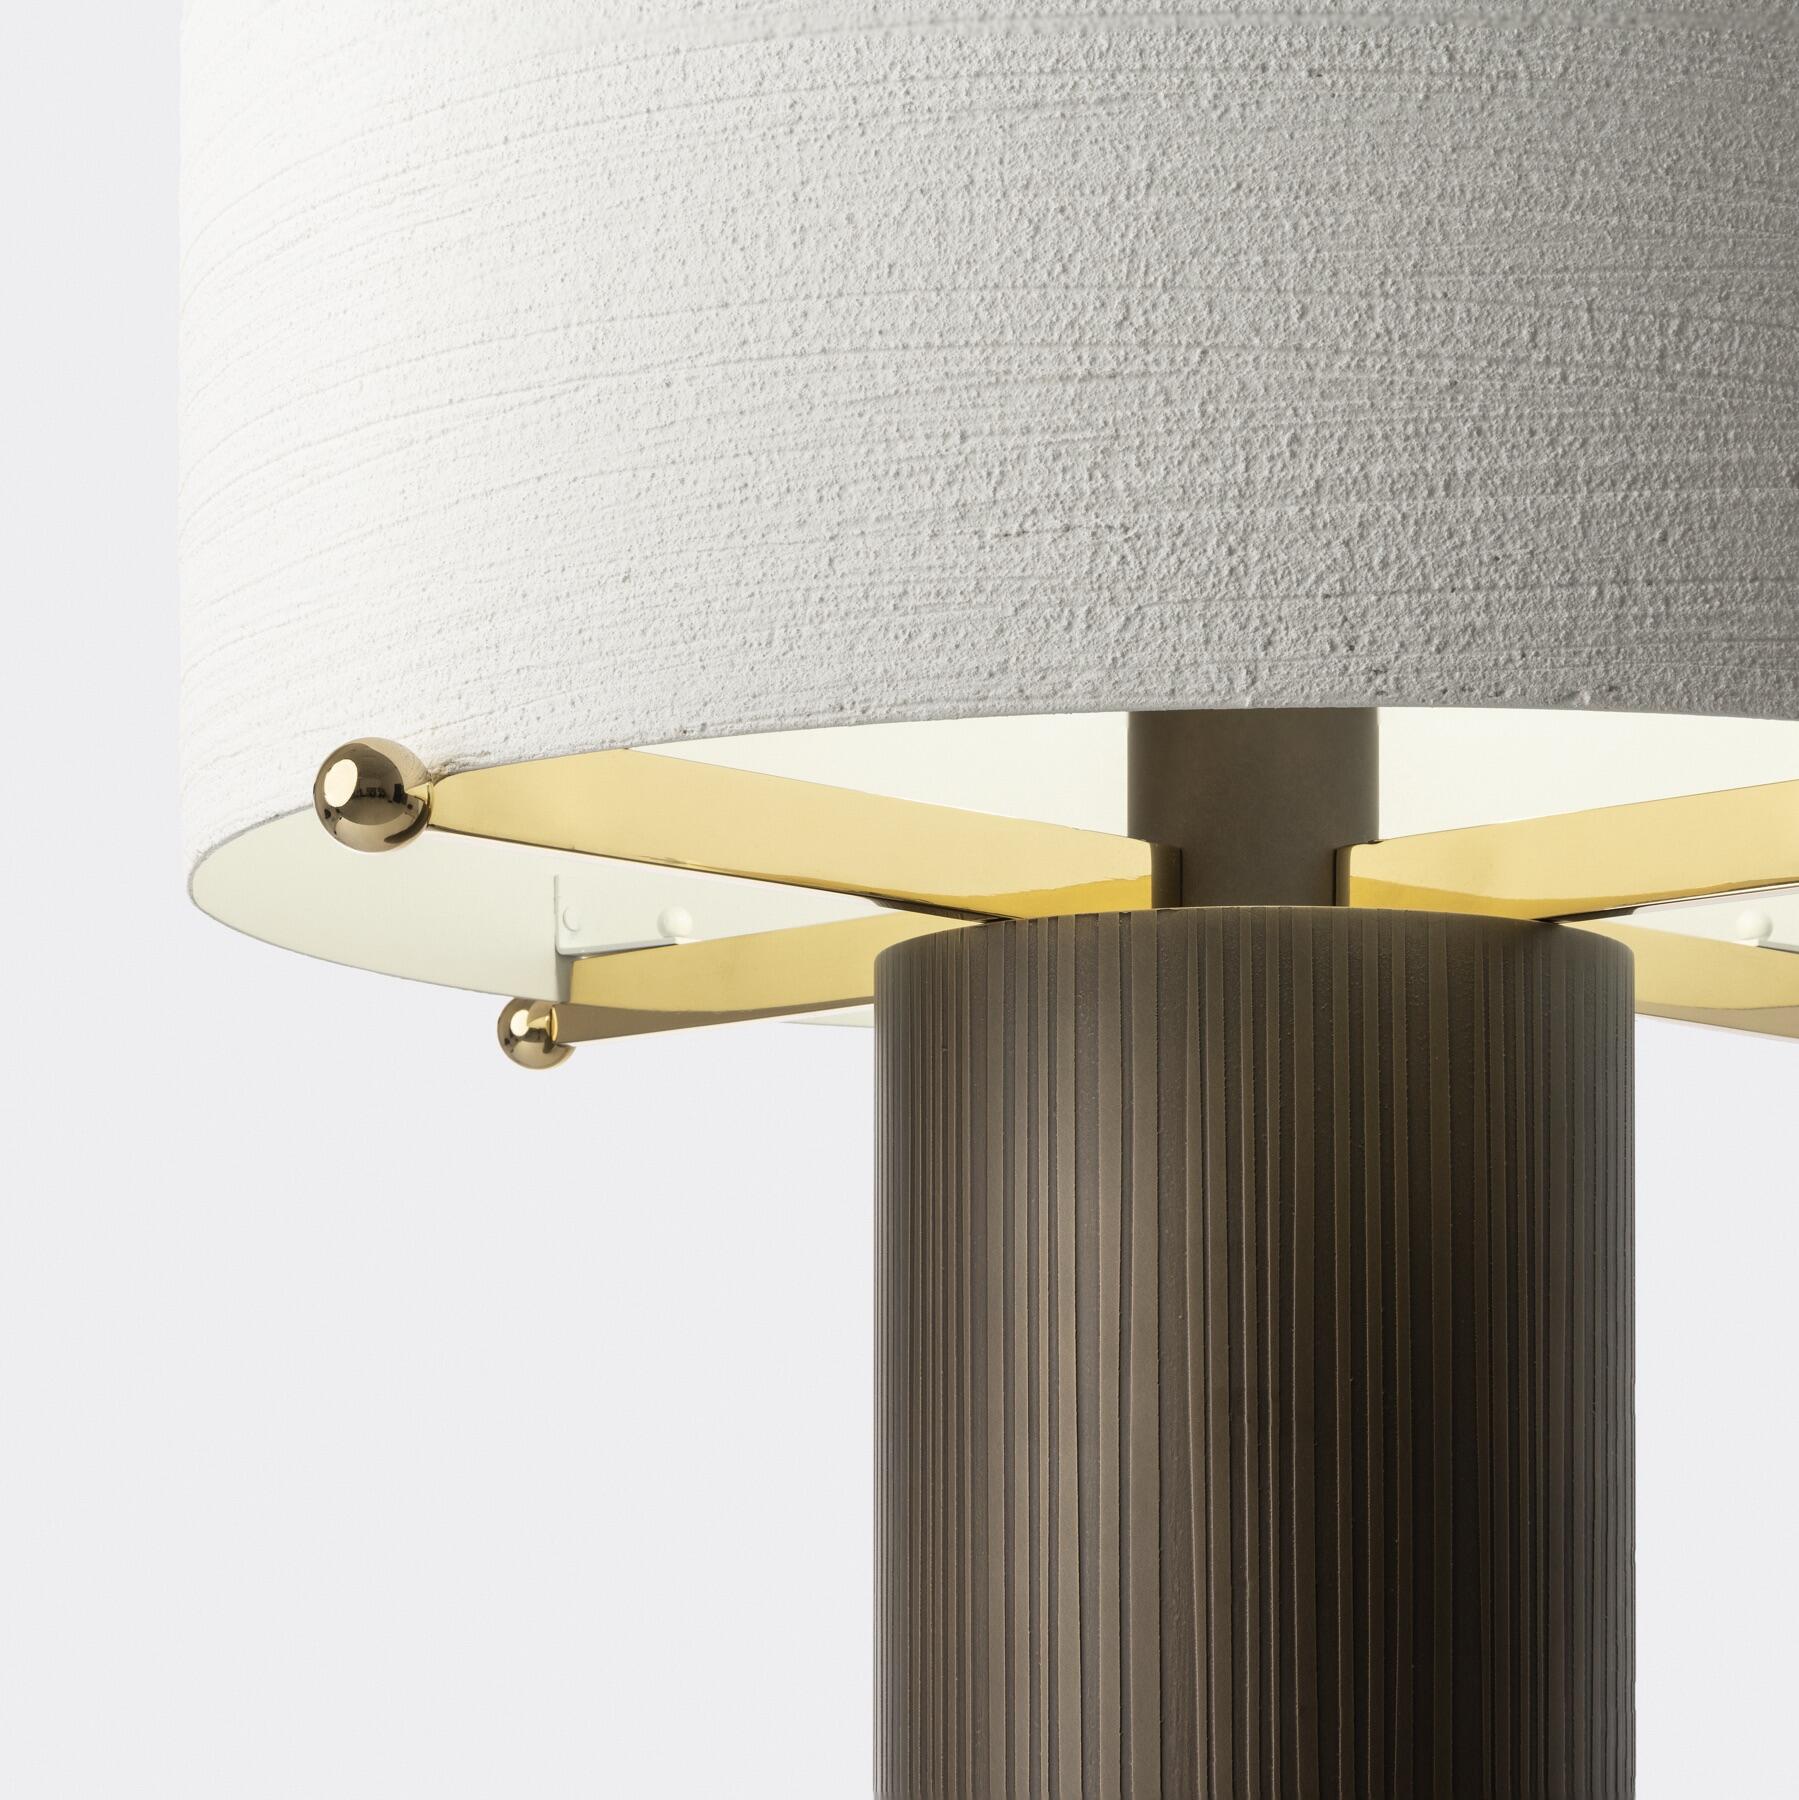 Sorbet Table Lamp, Etched Brass, Textured Plaster Shade